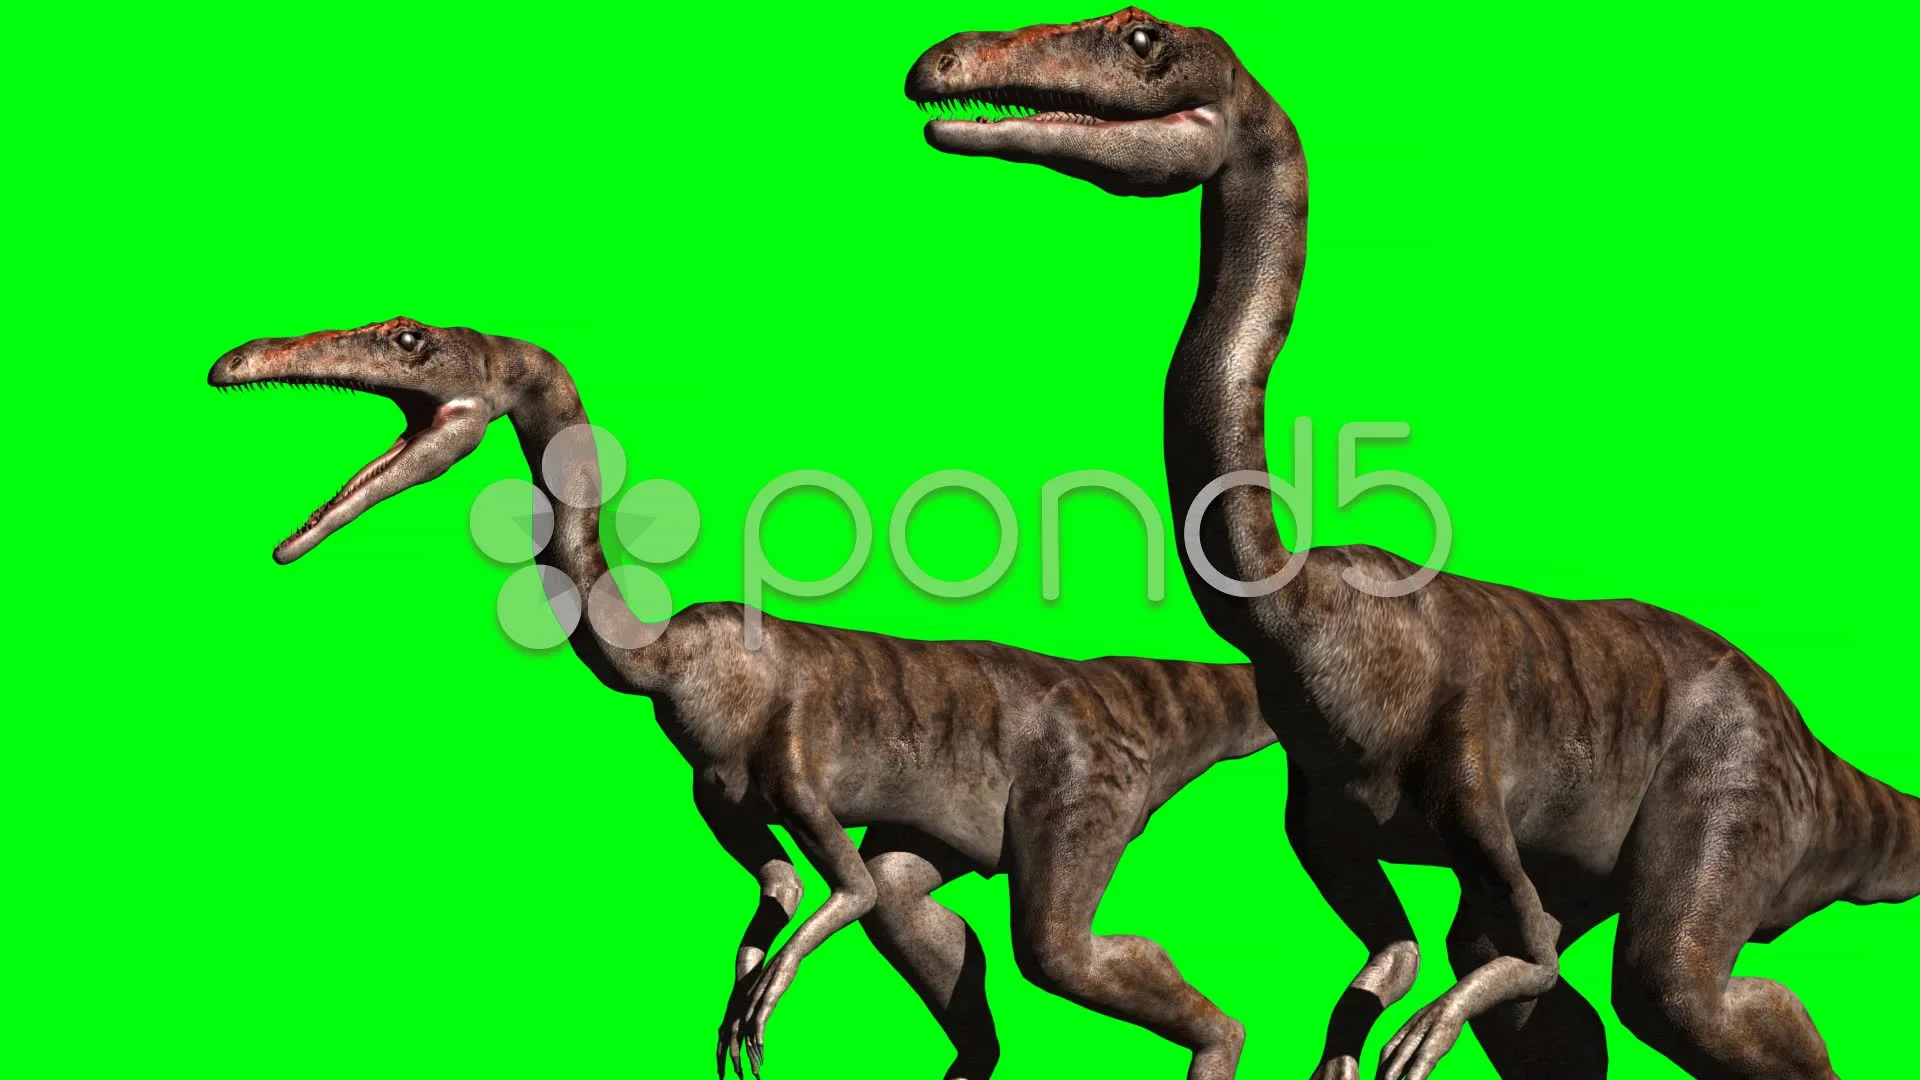 Keying A Group Of Dinosaurs Running On Green Screen Composite